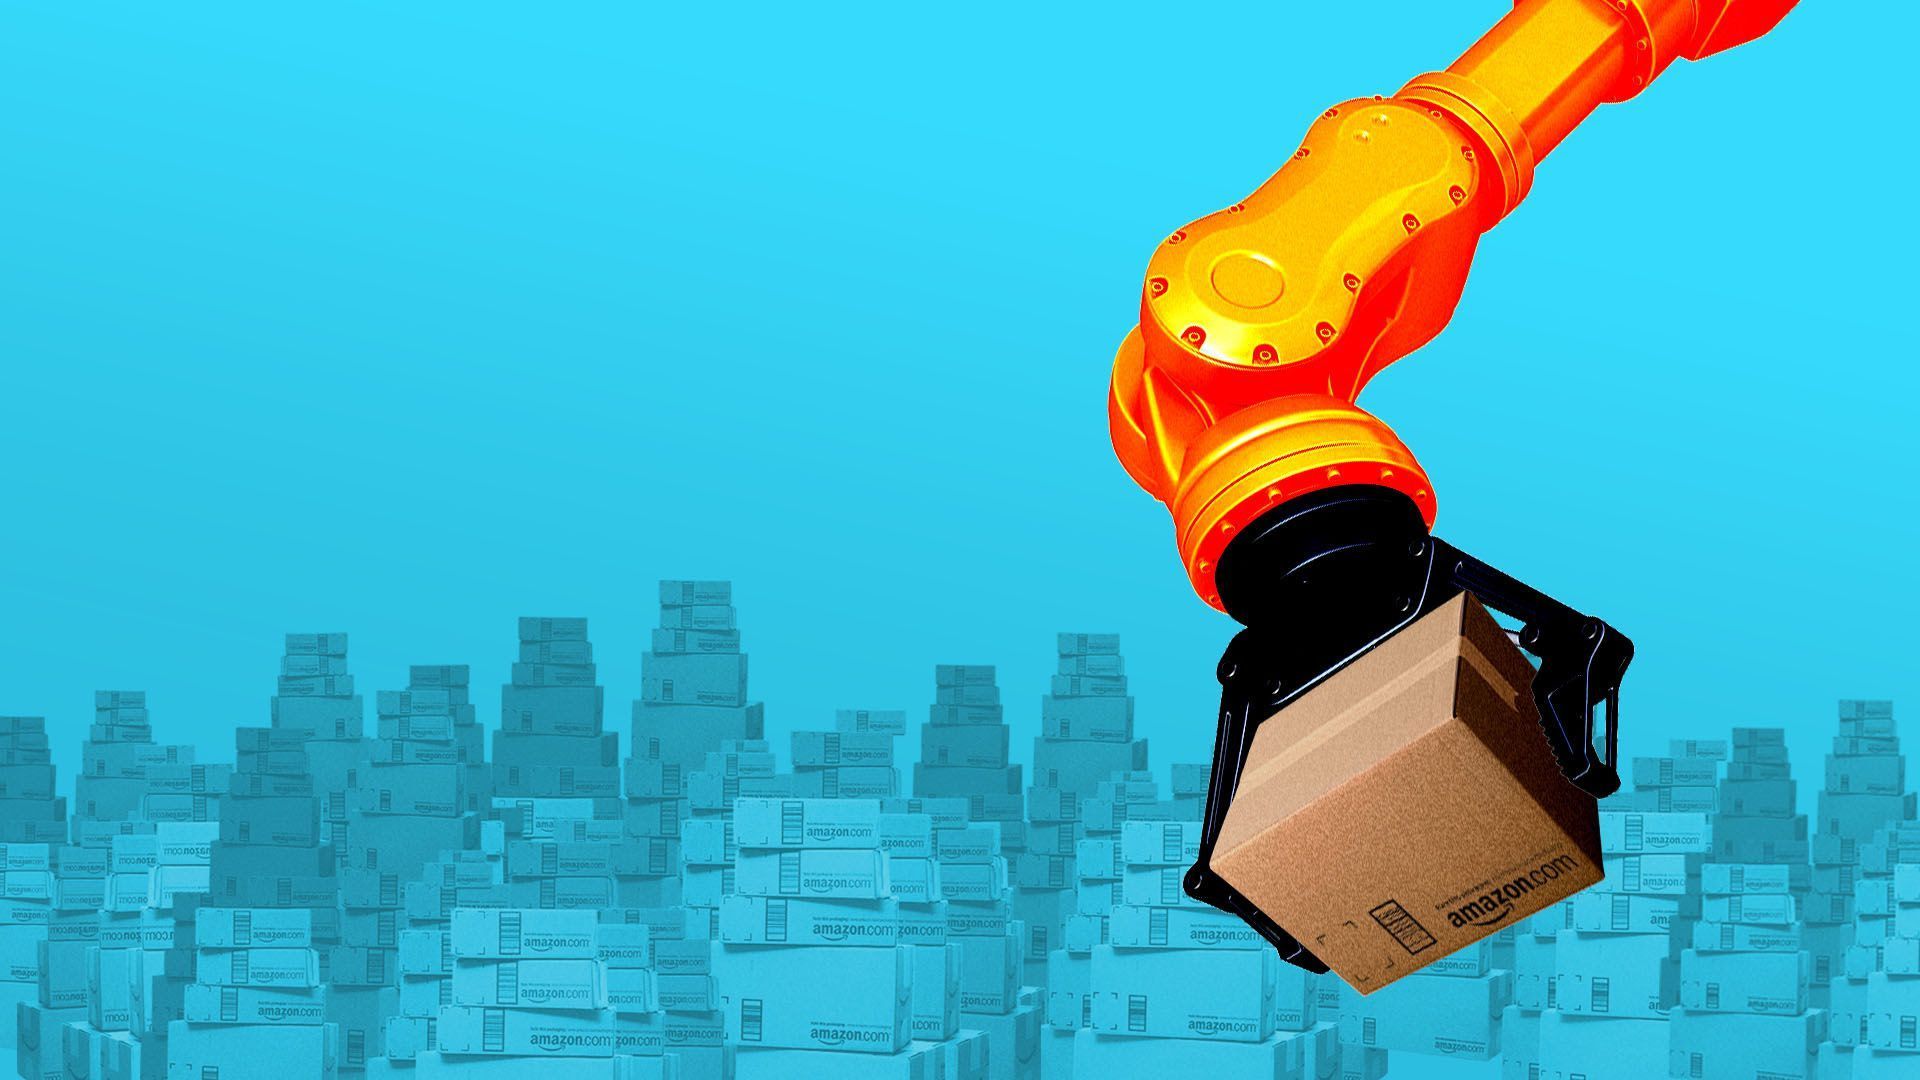 Illustration of a robotic arm moving a package in an Amazon warehouse